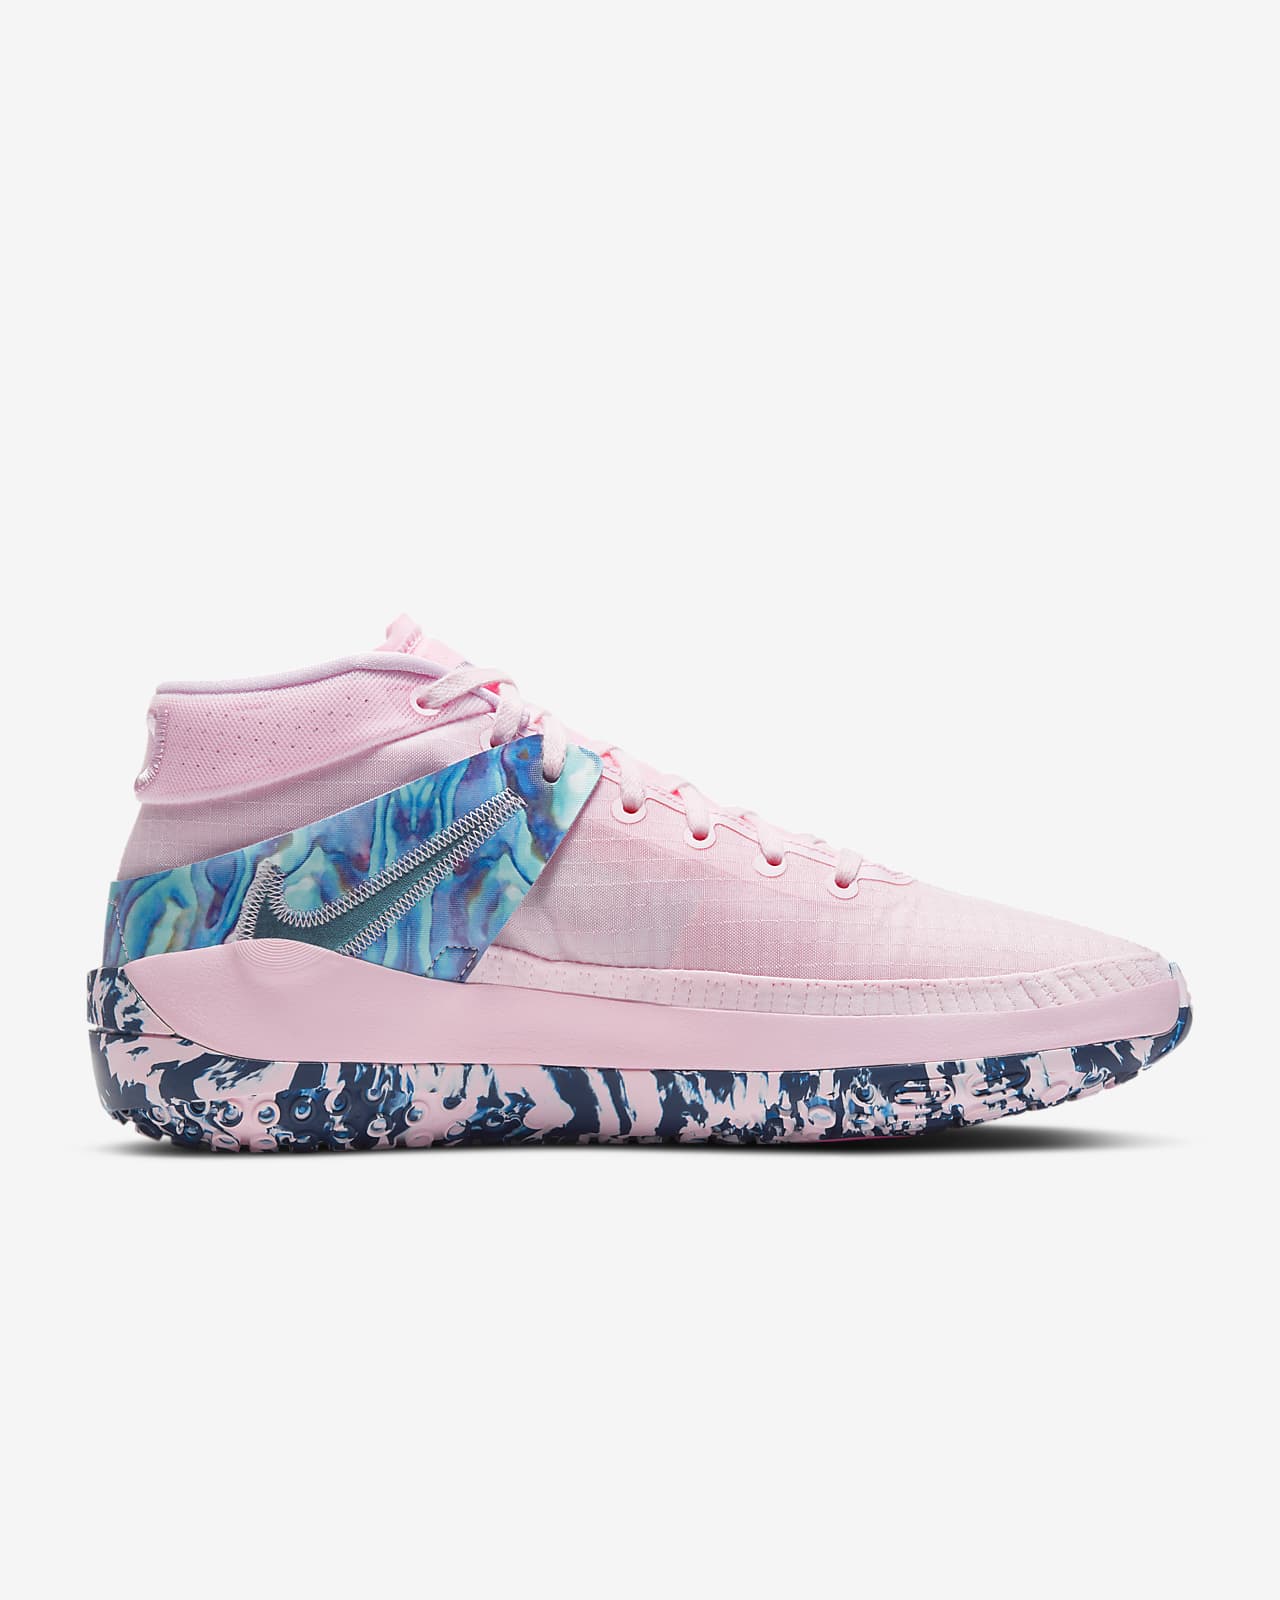 aunt pearl basketball shoes